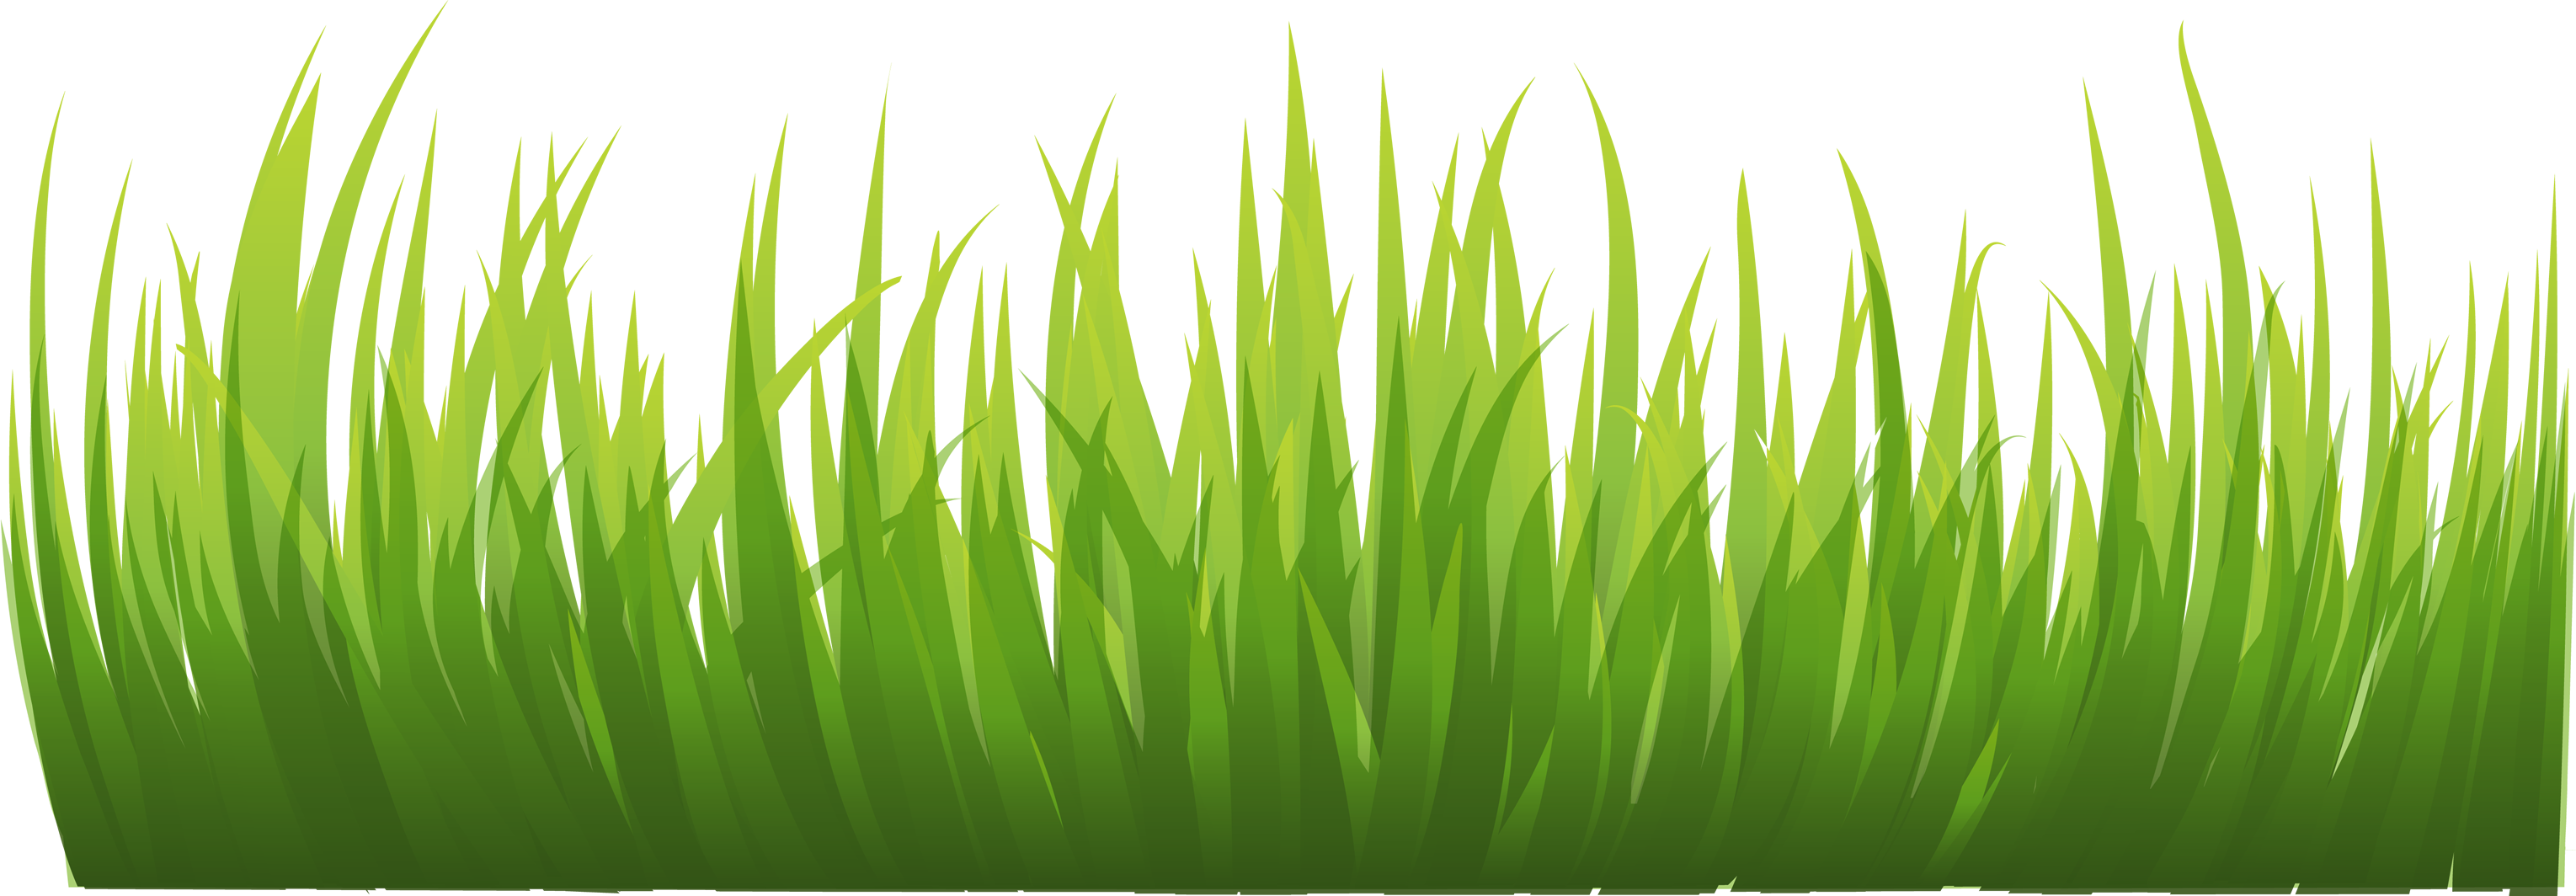 grass png images pictures #9237